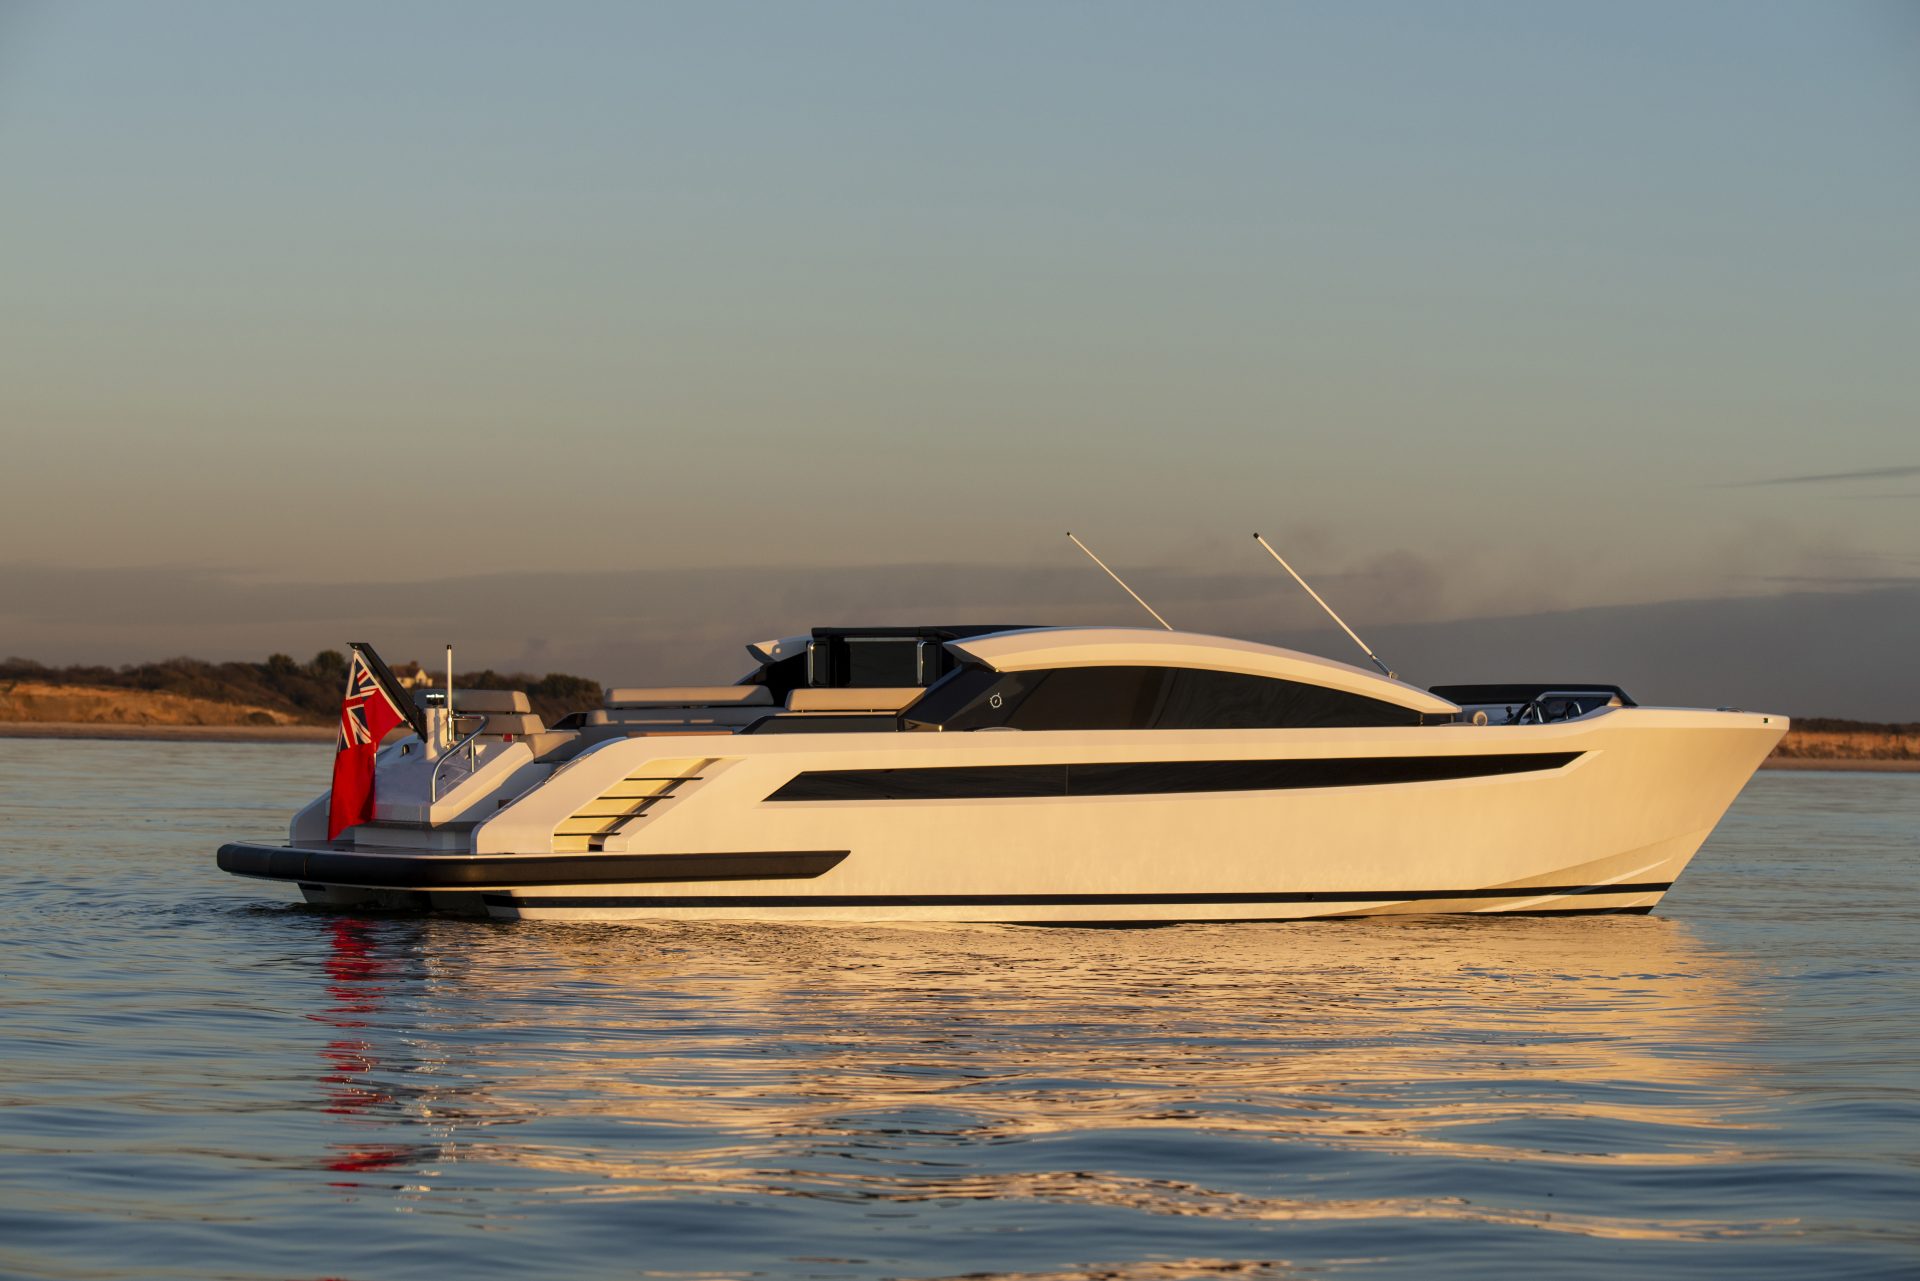 Compass Tenders built boats for iconic superyachts